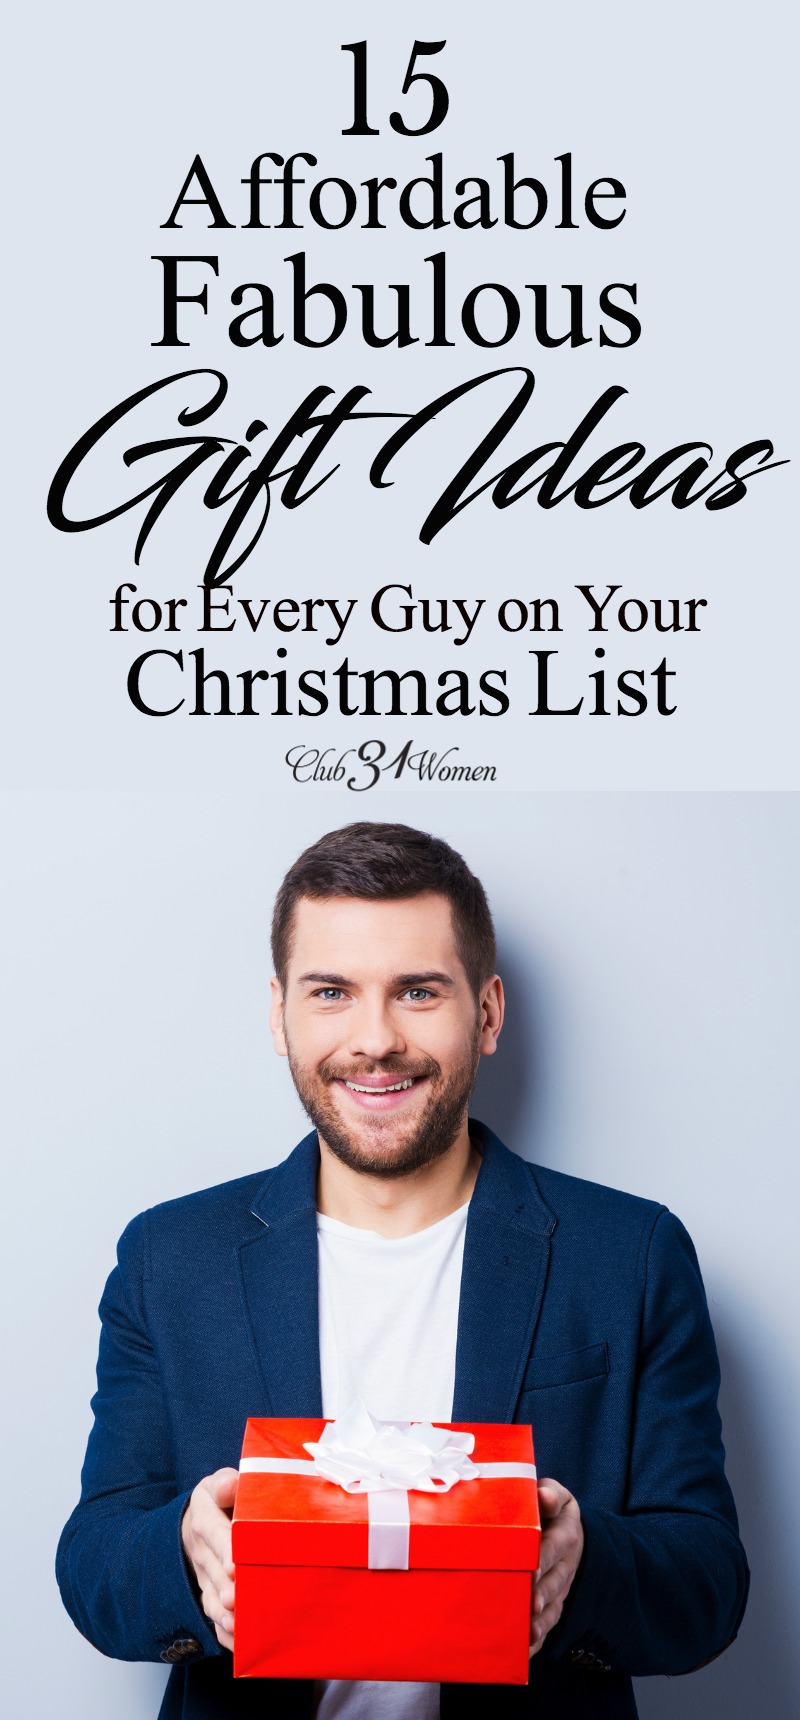 Looking for thoughtful gift ideas for your Christmas list? Here's a terrific affordable list for those great guys during the holiday season! via @Club31Women